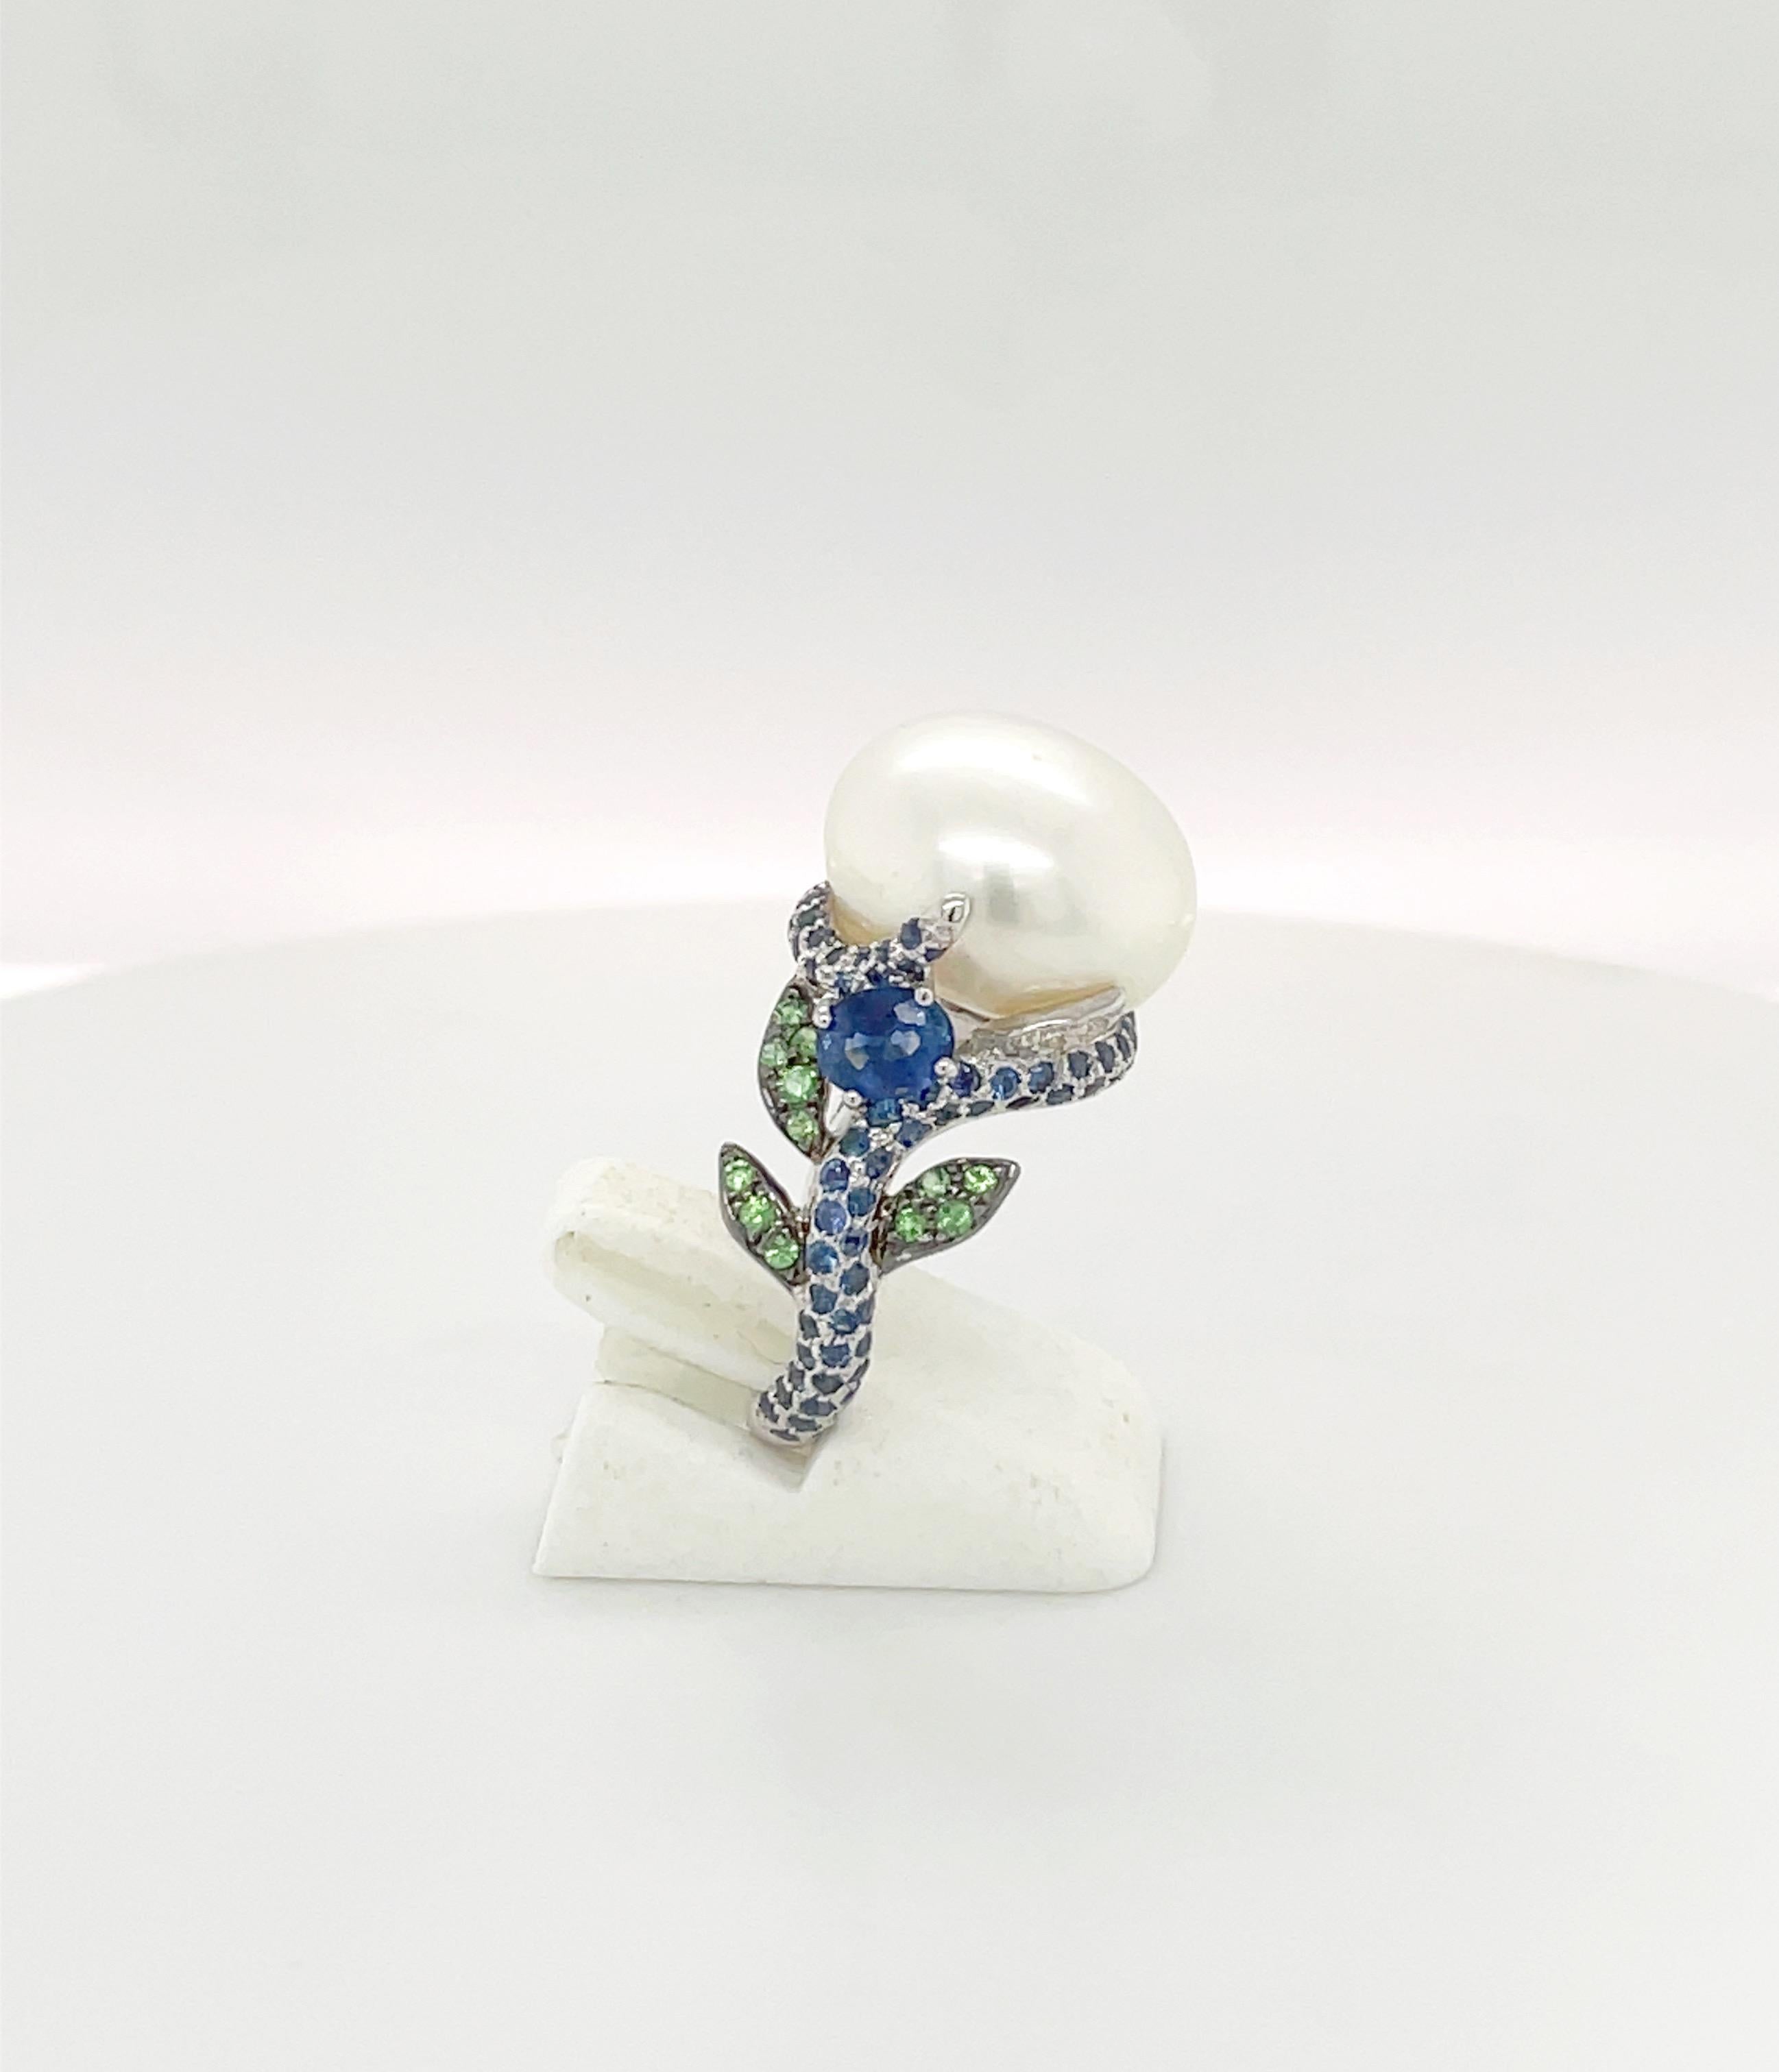 A lovely designed ring centering a 14.5 x 10.5 mm pearl. The 18 karat white gold setting is set with round blue sapphires all along the shank. Green tsavorites and diamonds are set as leaves along with a larger blue sapphire on either side.
Blue